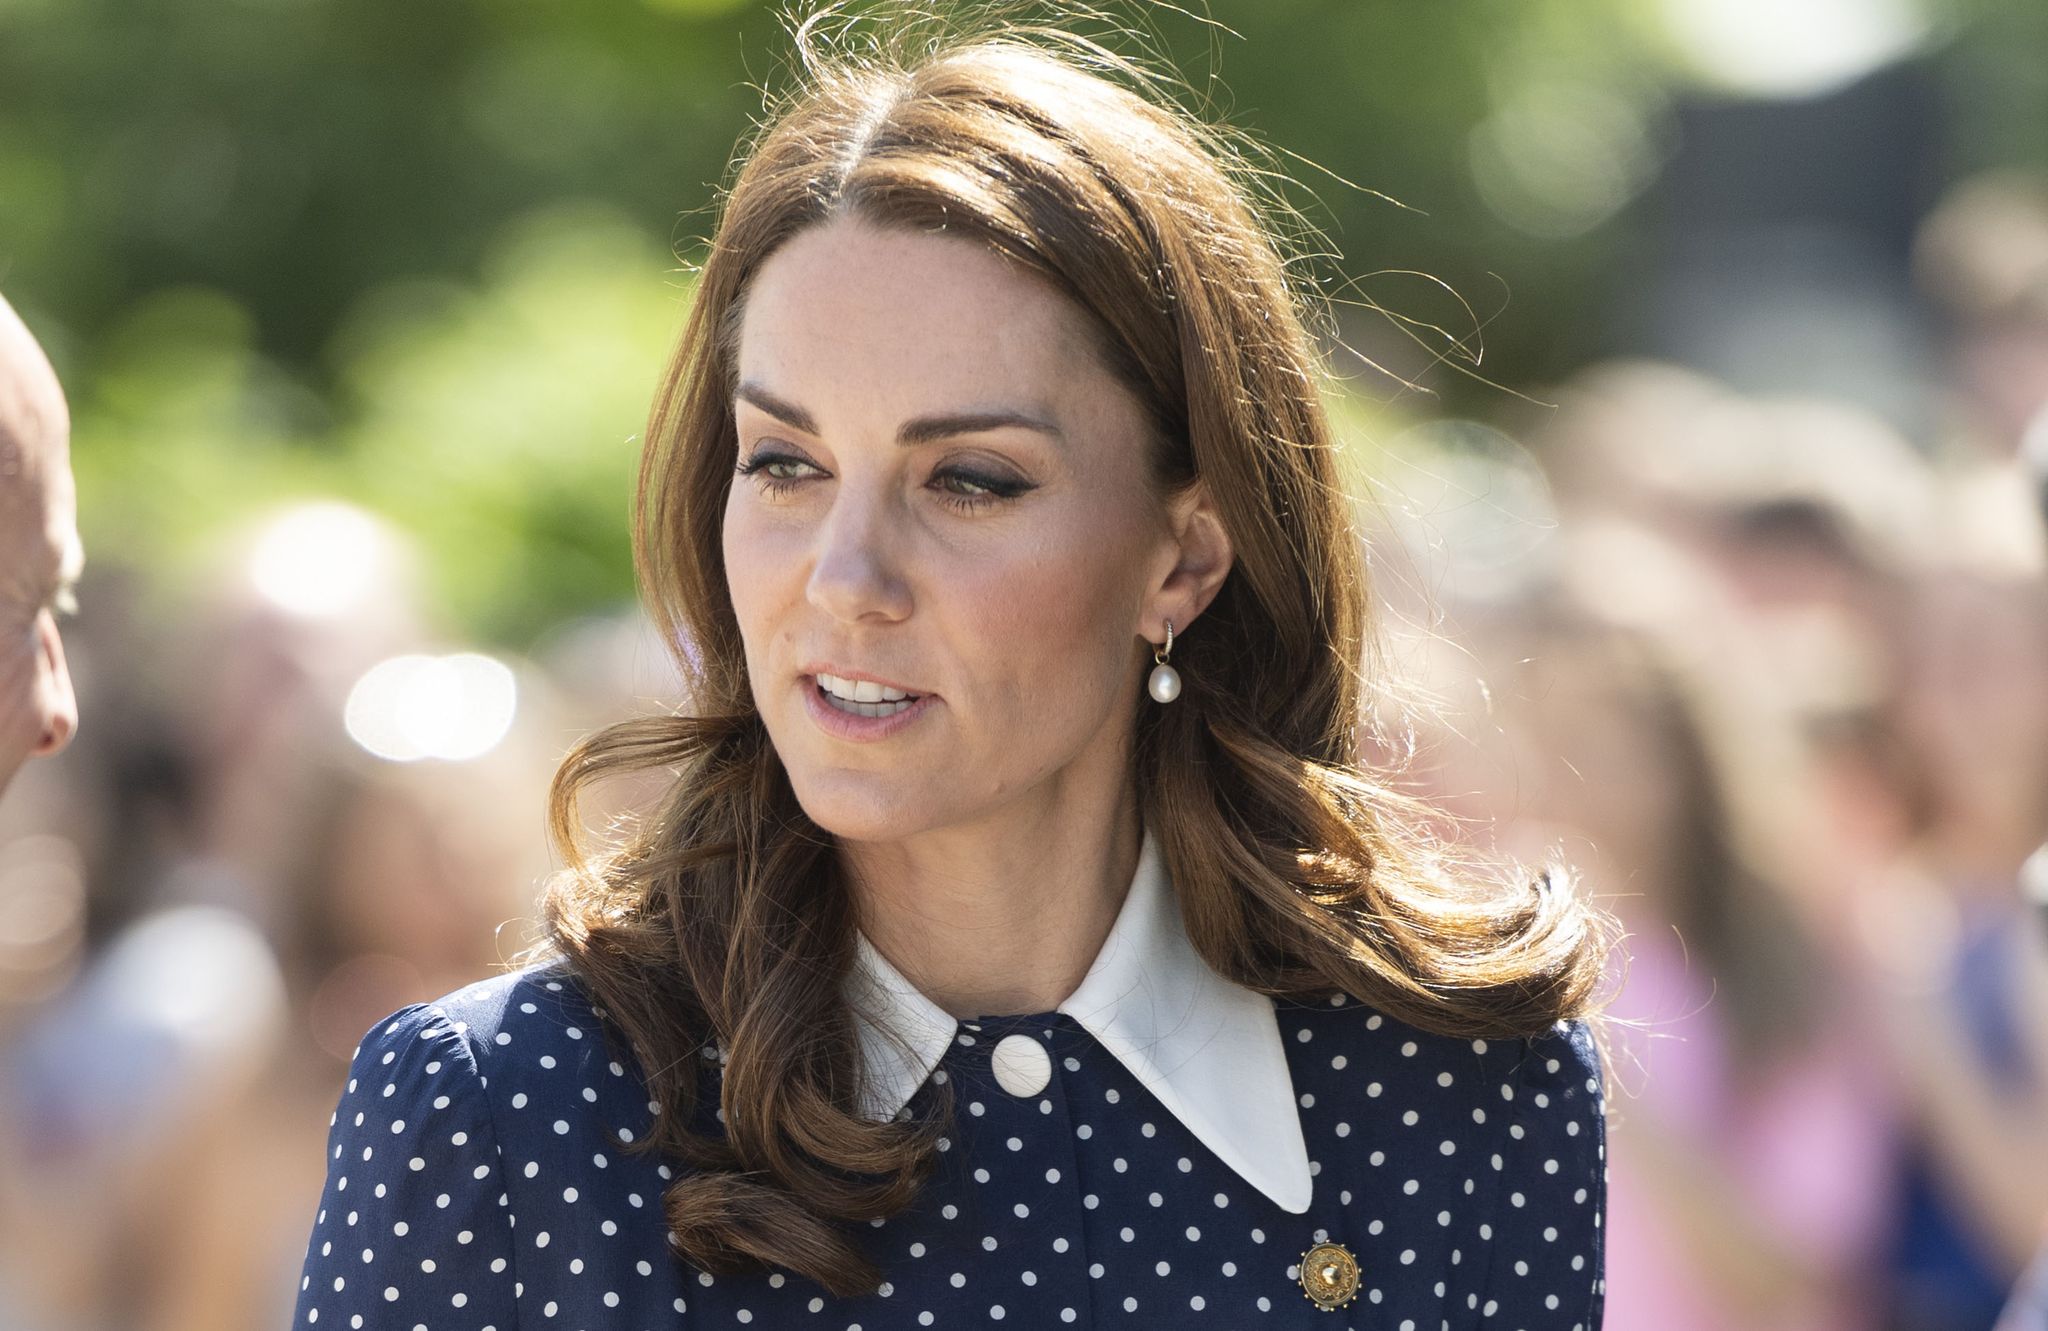 Kate Middleton Can't Get Enough Of Polka Dots Right Now, And Neither Can We